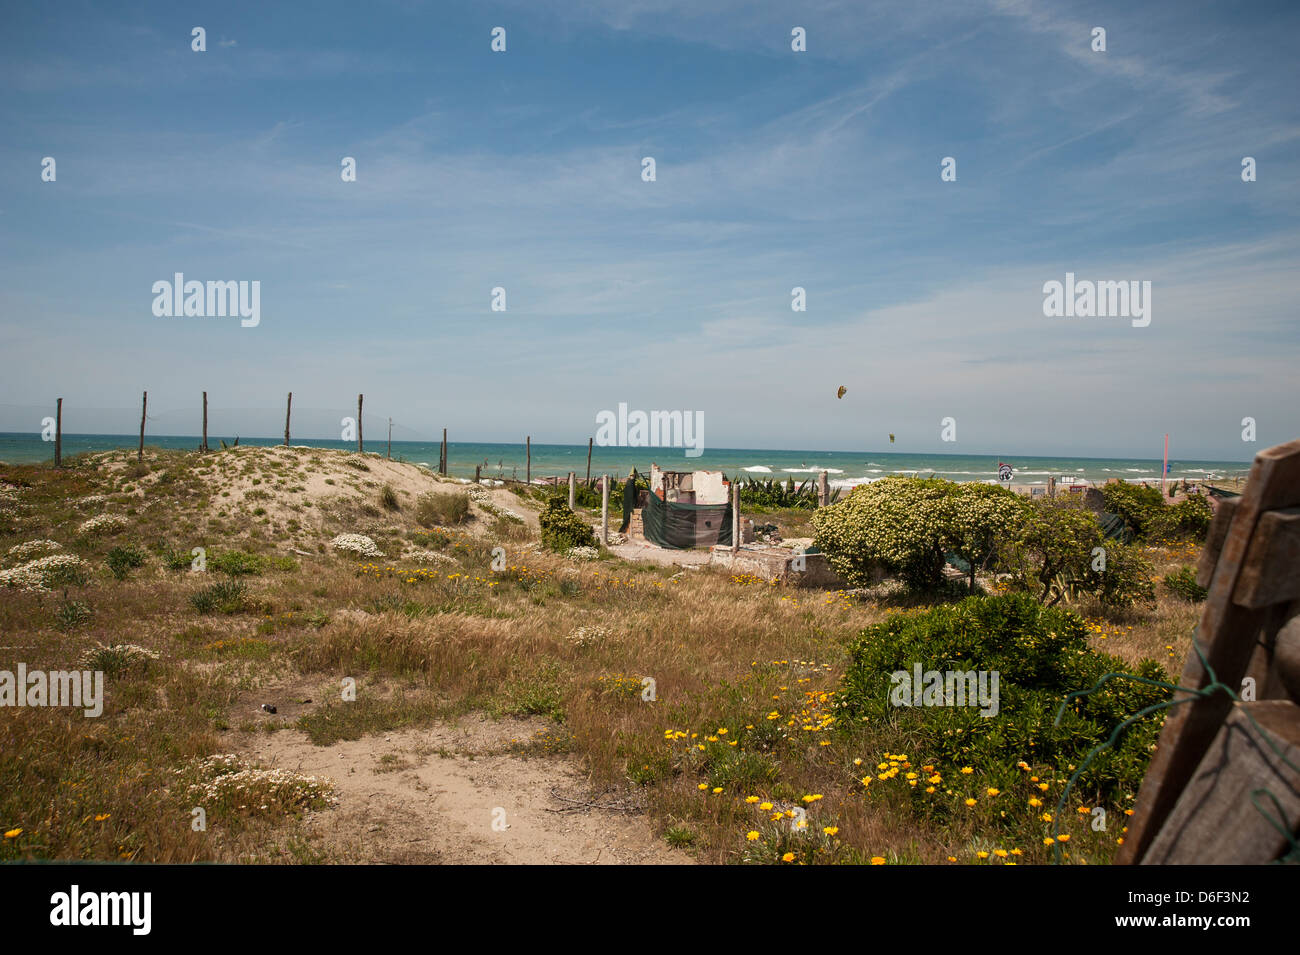 view of the sea and the beach with yellow daisies Stock Photo